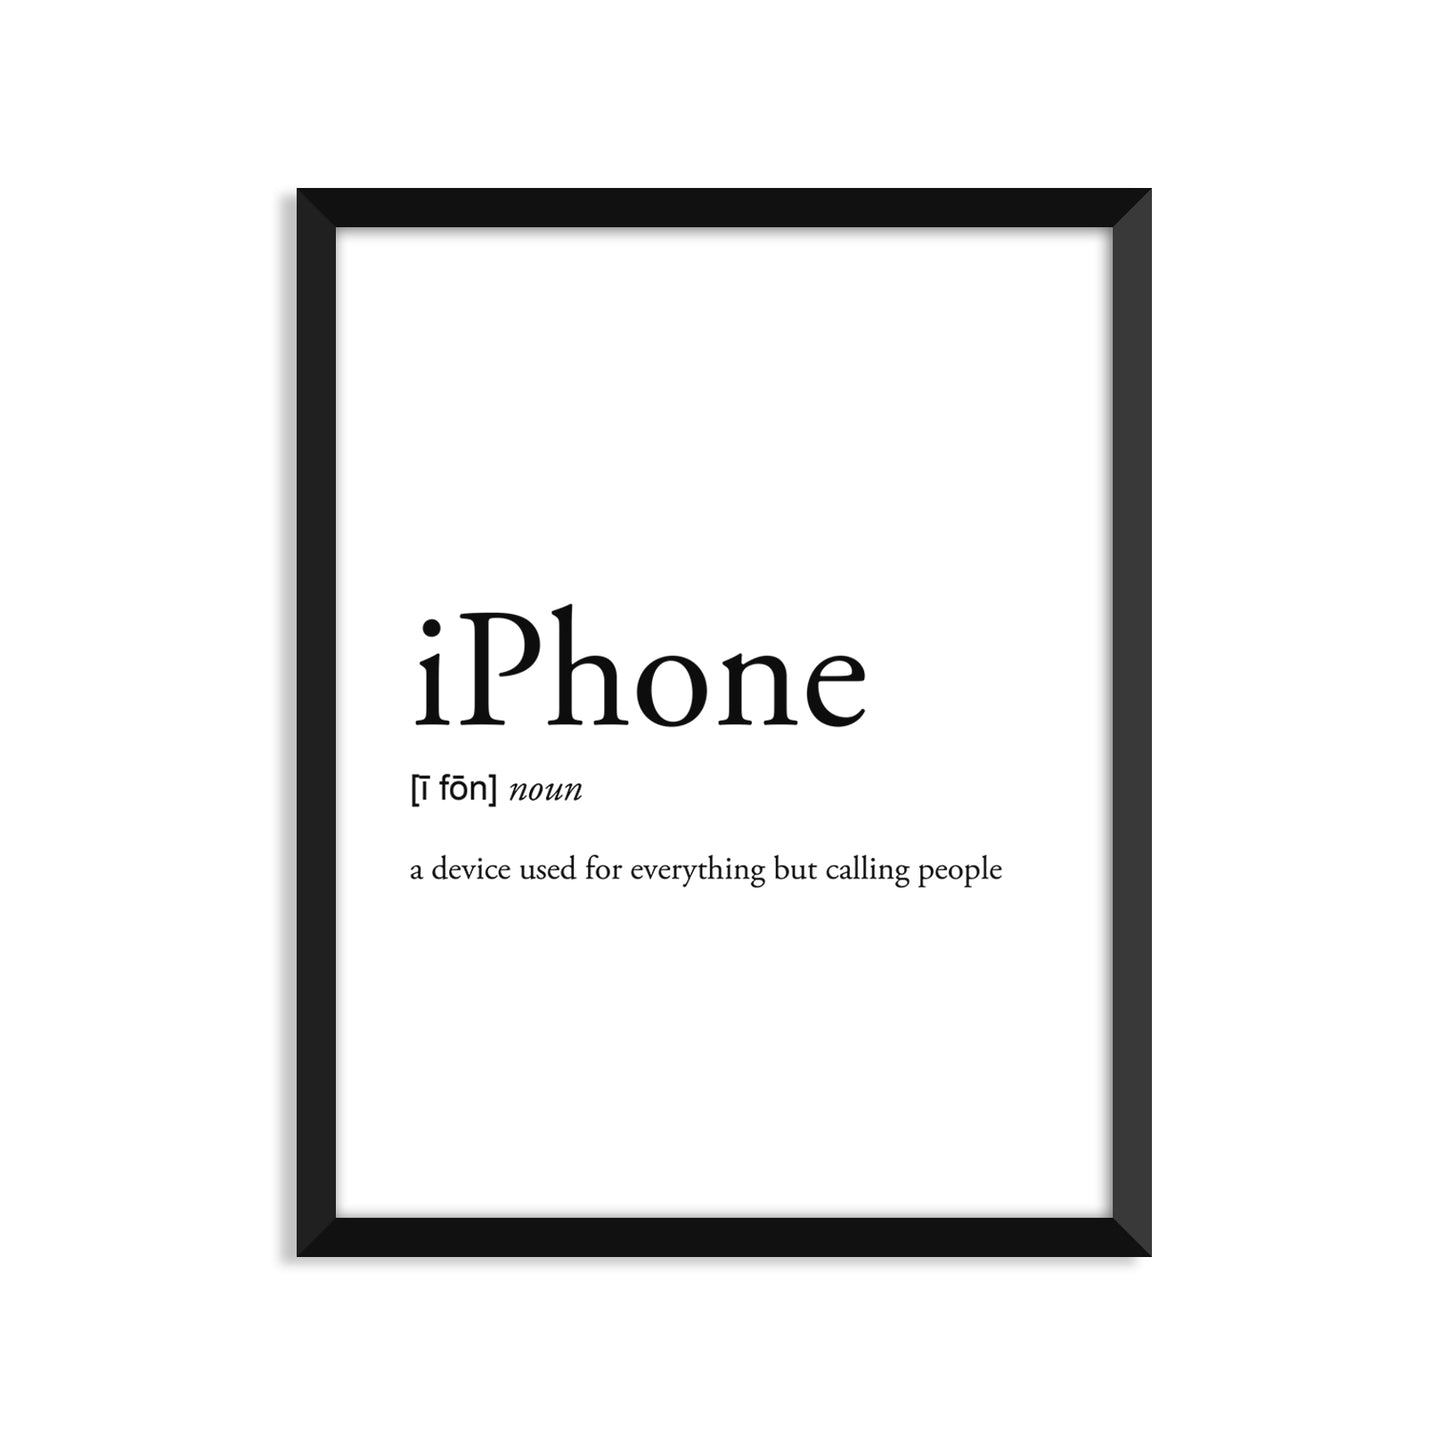 Iphone Definition - Unframed Art Print Or Greeting Card